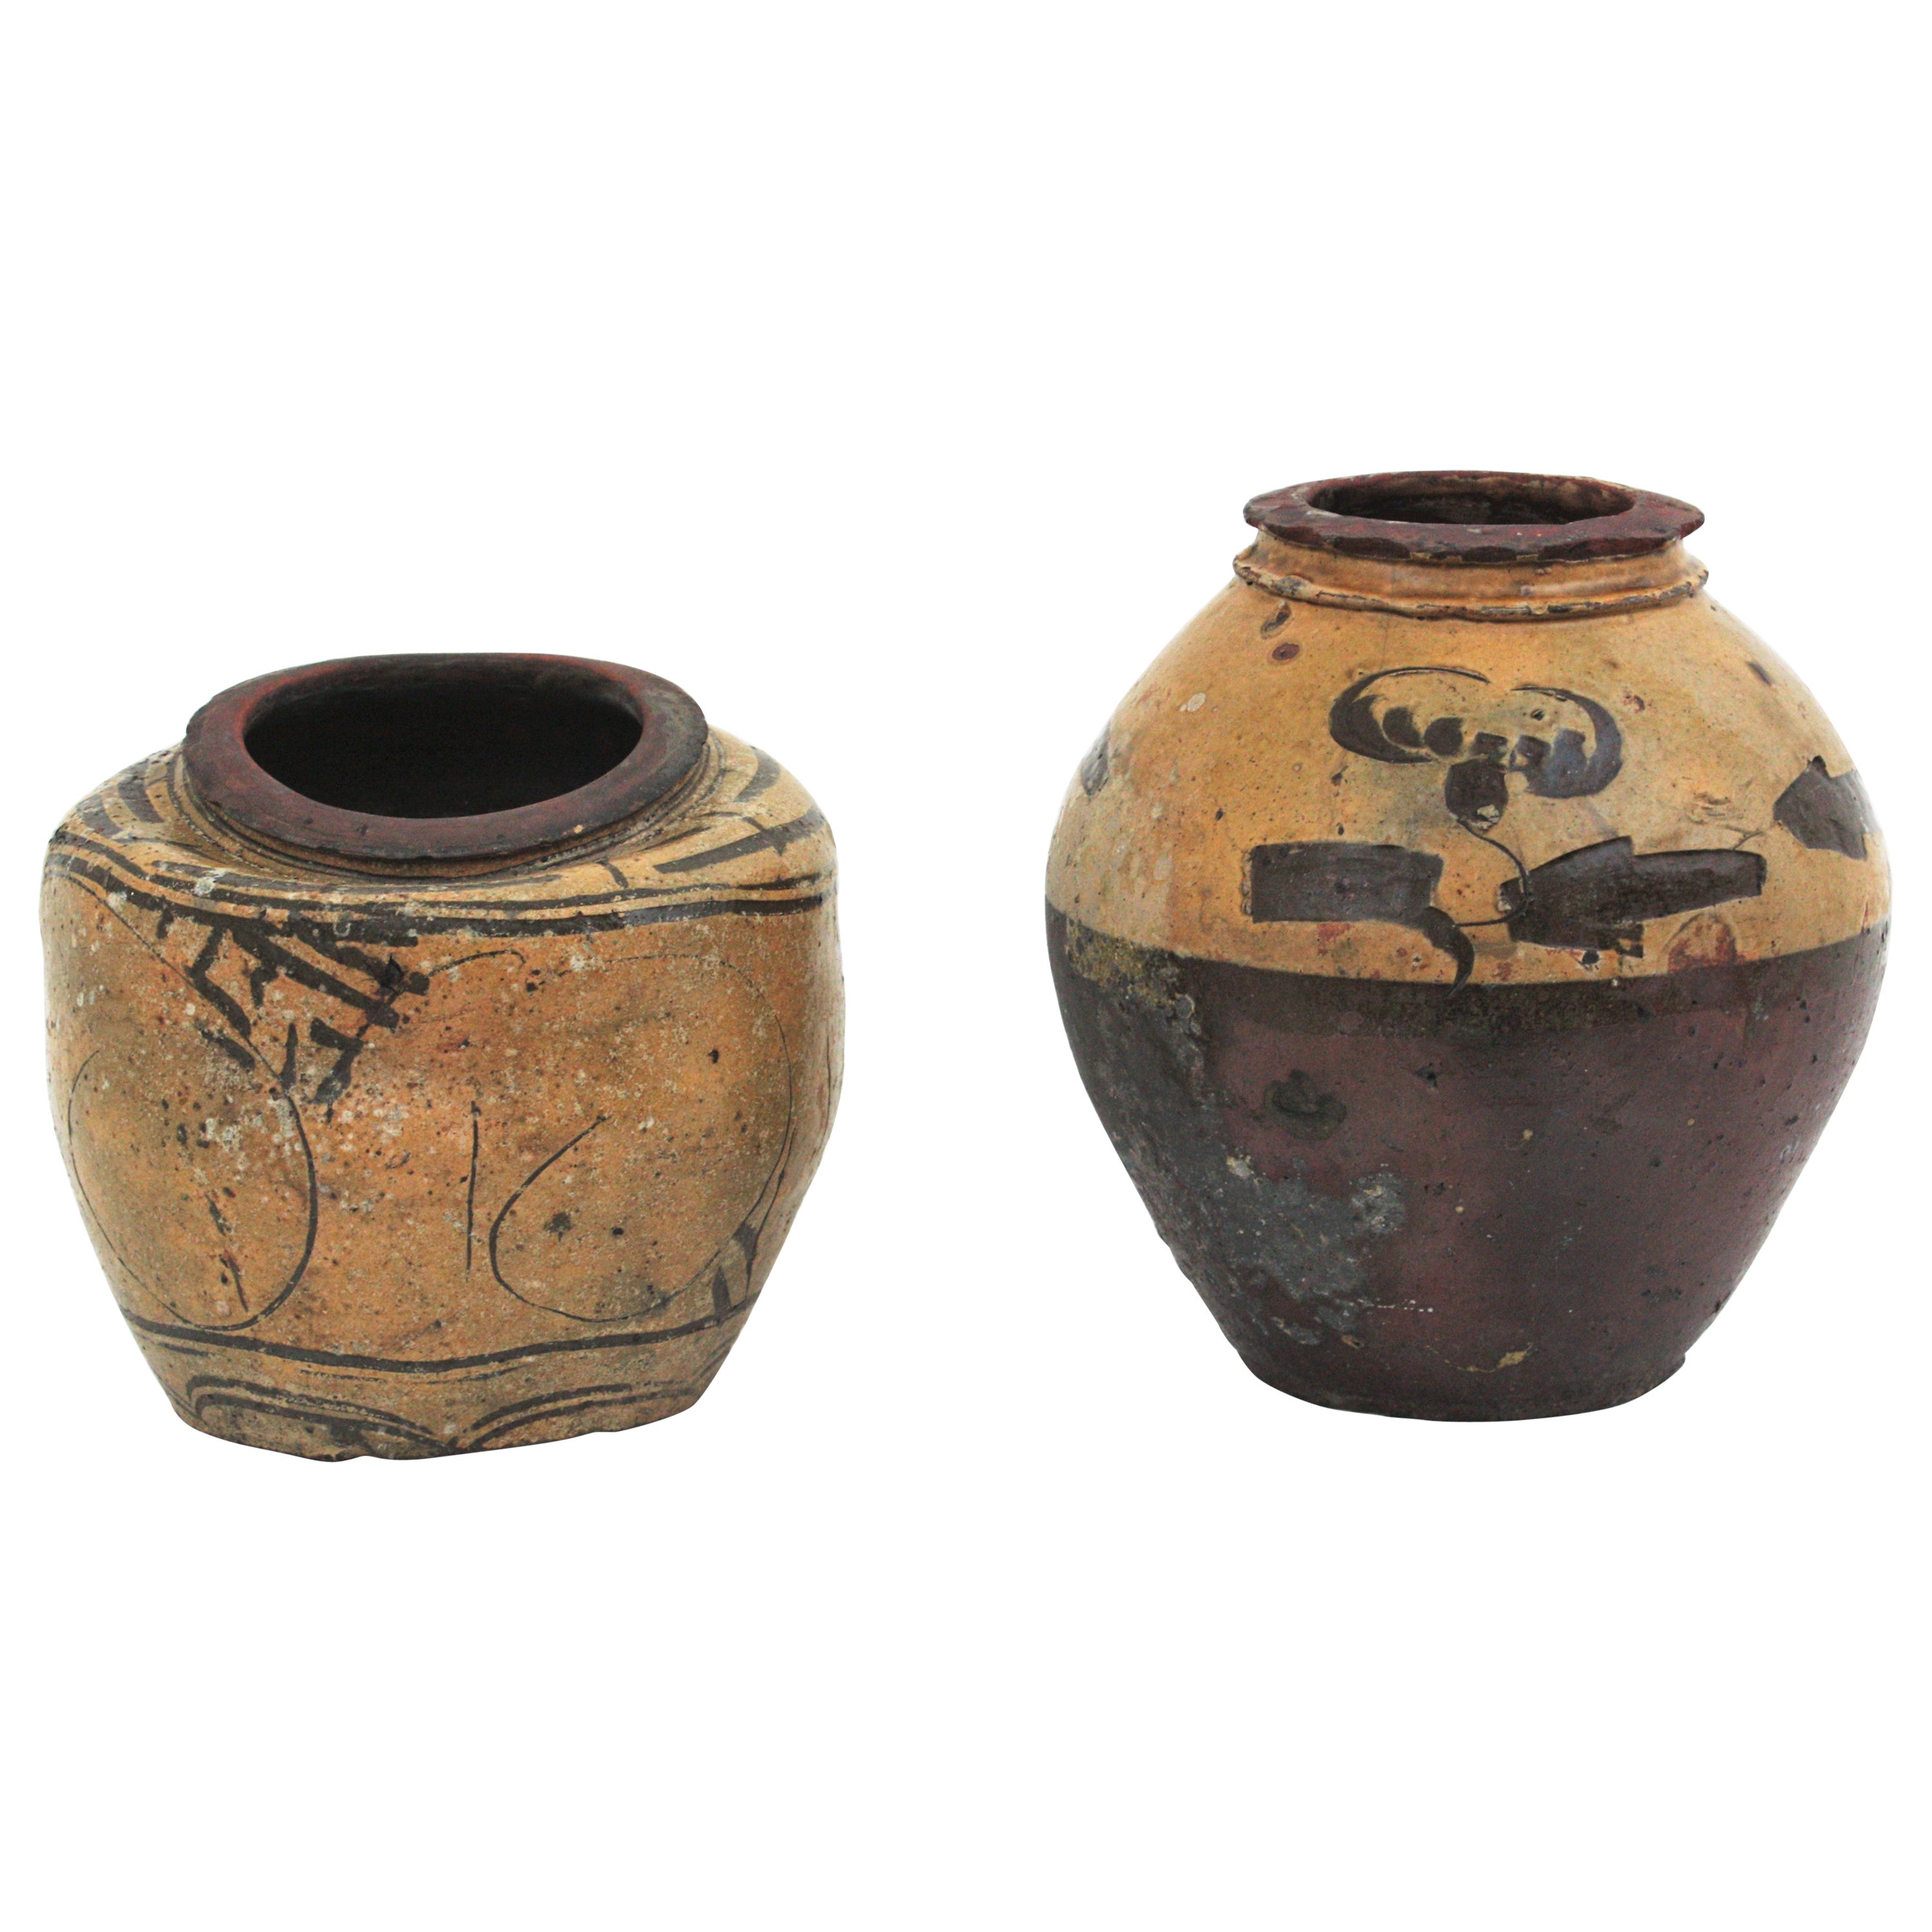 Pair of Chinese Terracotta Urns / Vessels